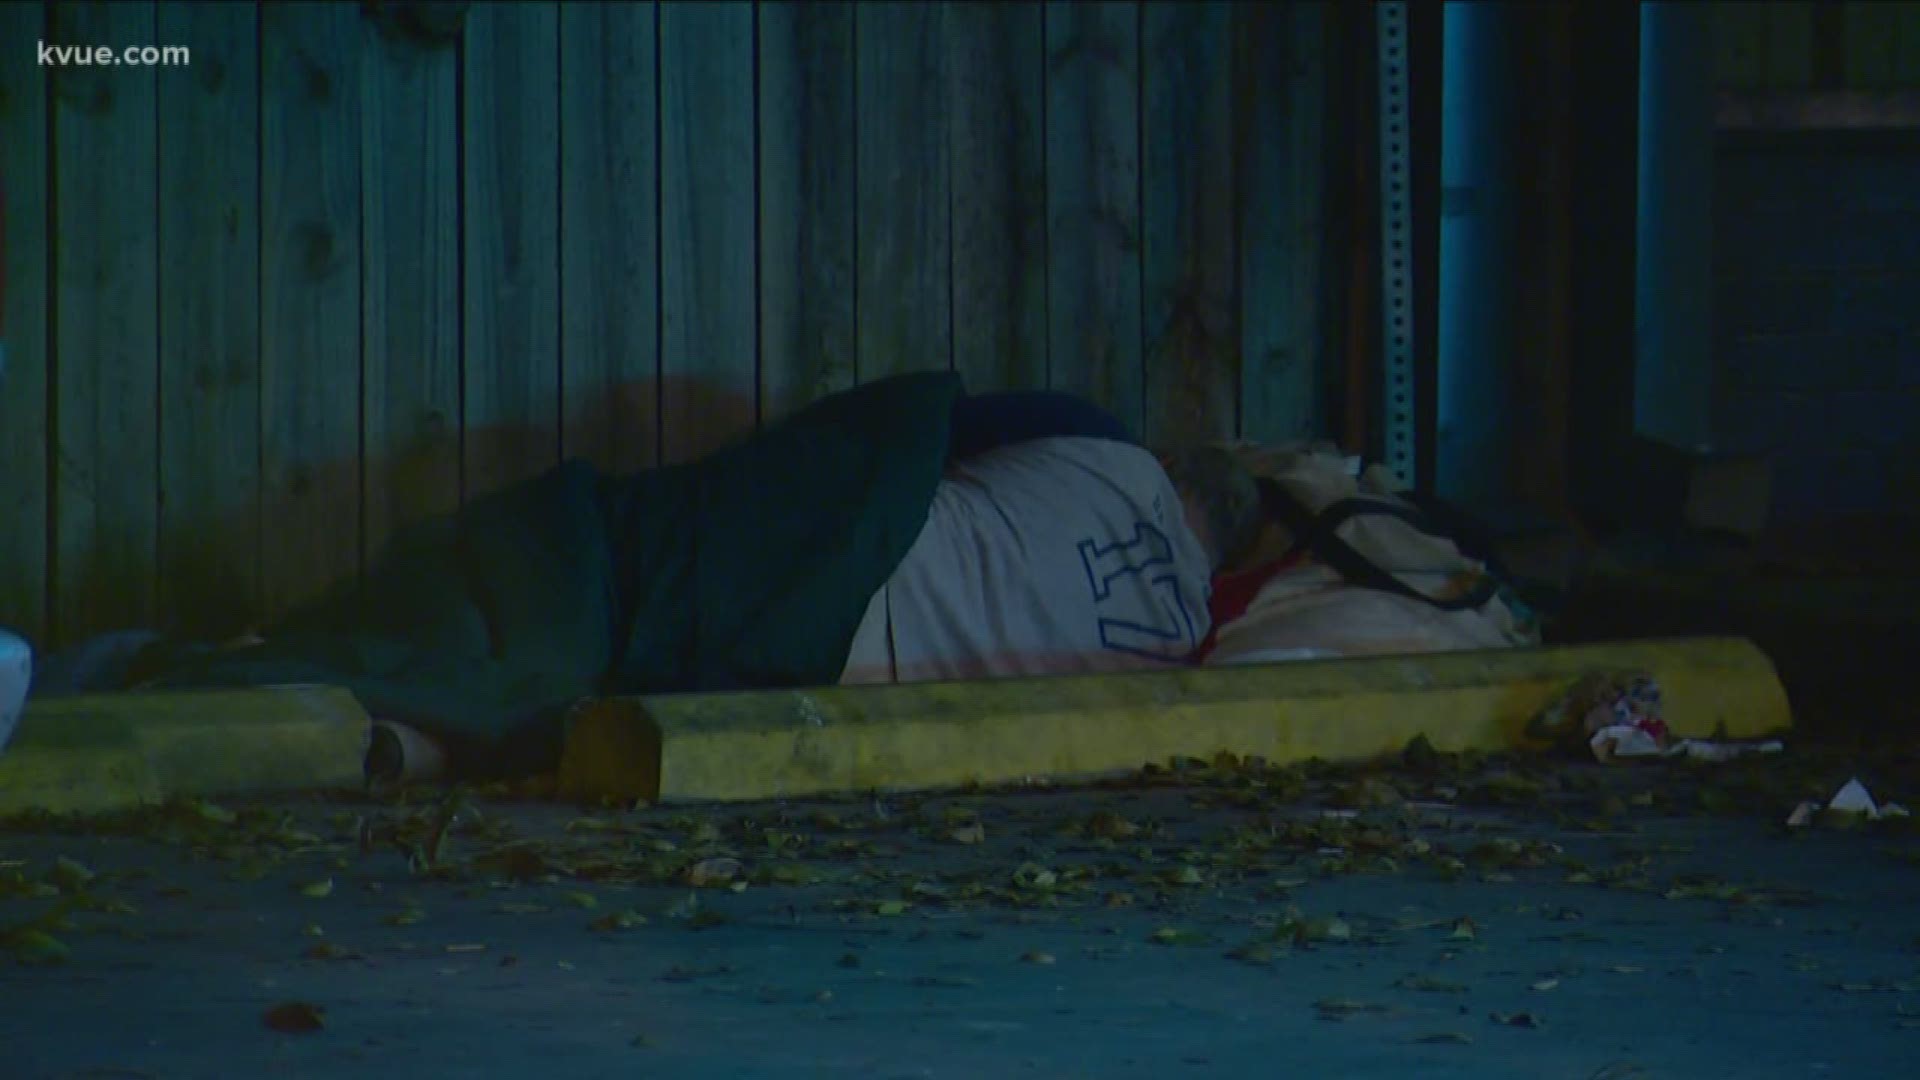 In January about 700 volunteers and city leaders went around travis county before sunrise , counting the number of homeless people that were sleeping on the streets or in homeless camps. It was part of the annual 'Point In Time' count.